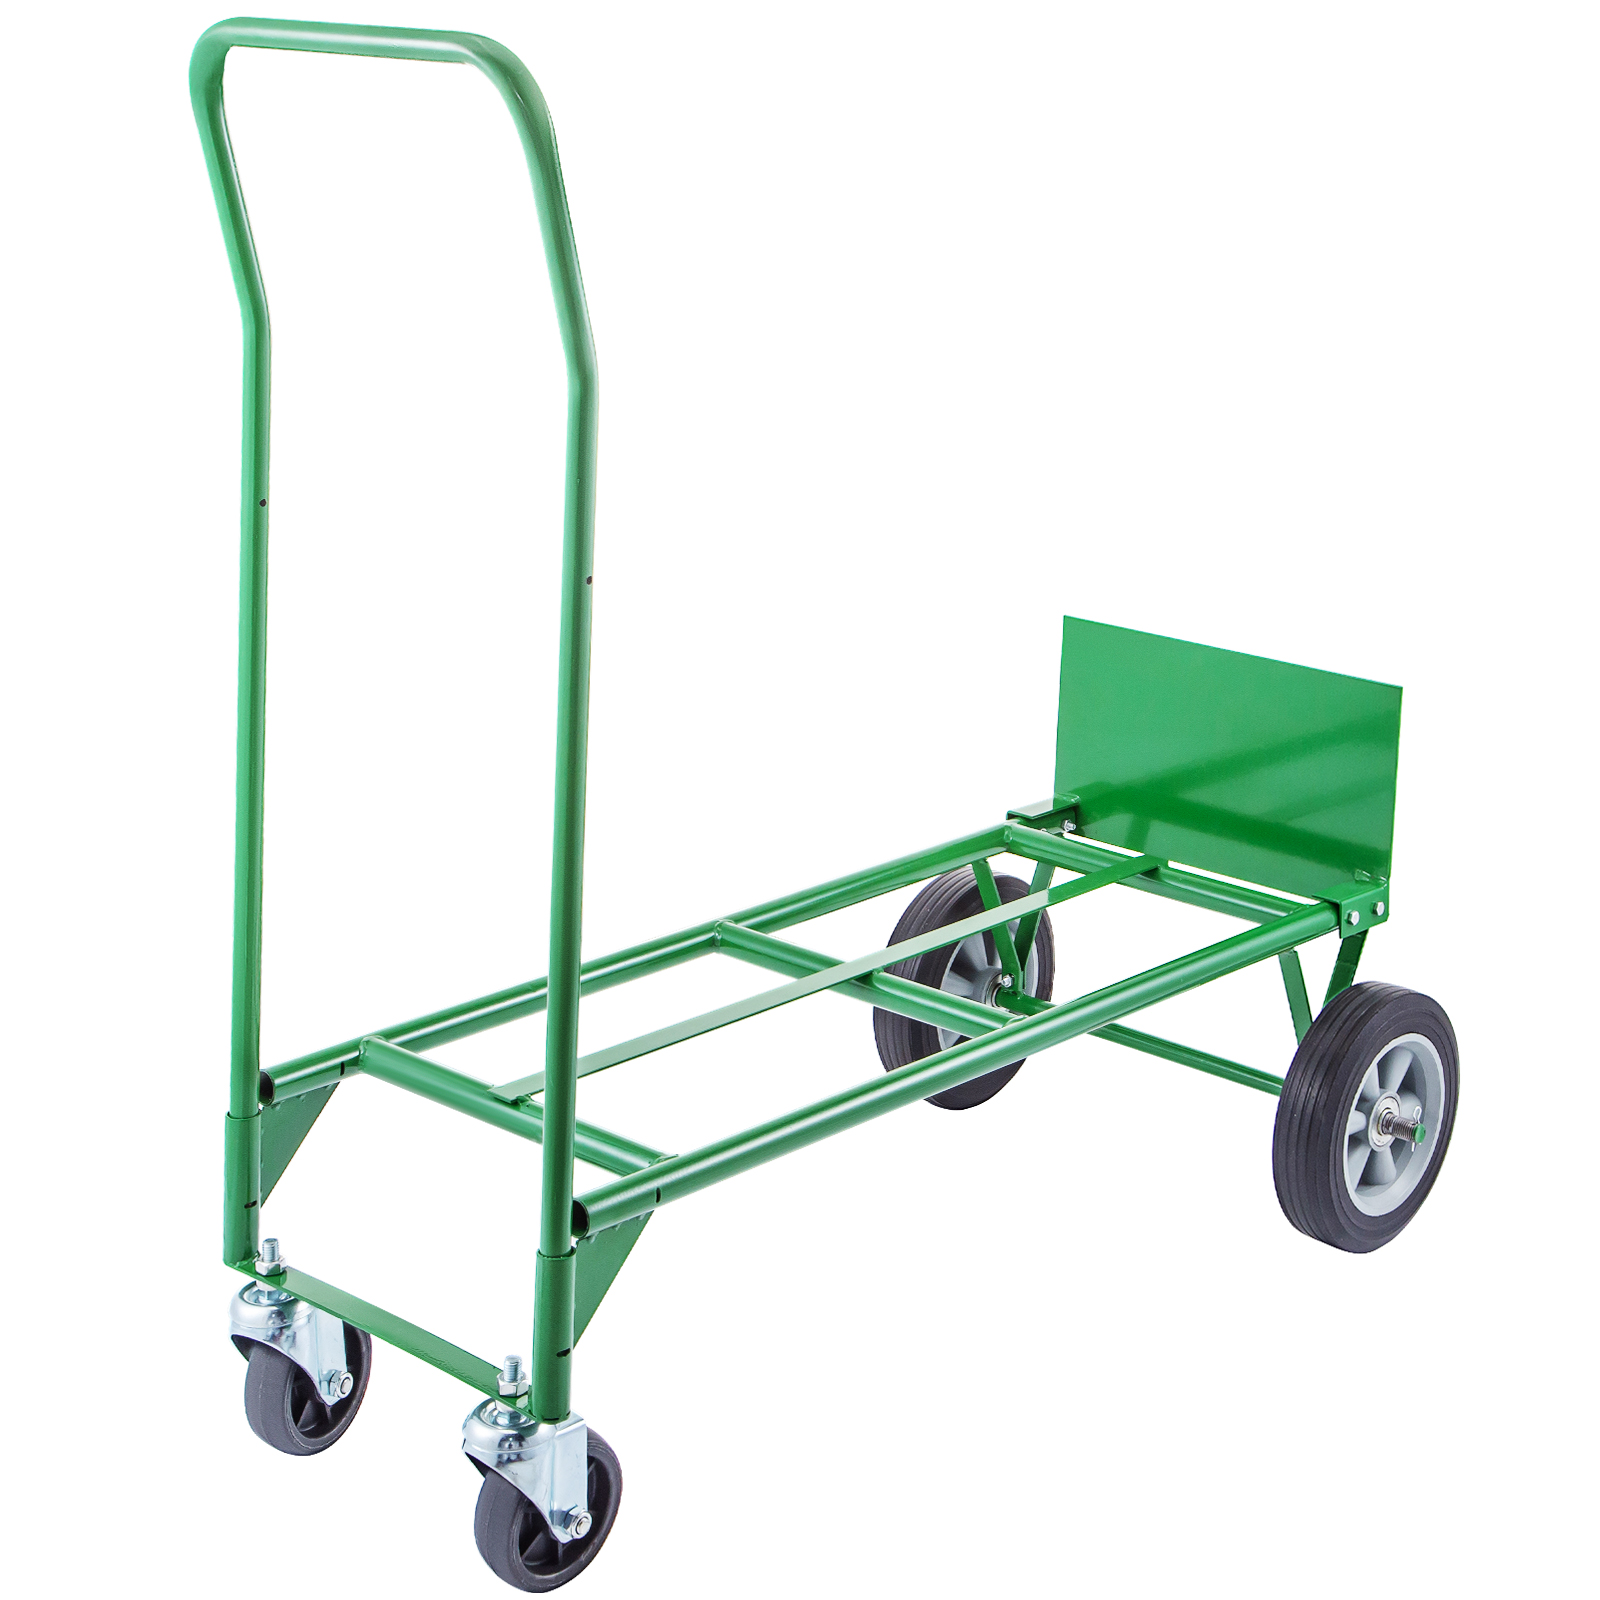 Hand Truck Convertible Dolly 300lb W/ 8inch Plastic Core Wheels In Green от Vevor Many GEOs